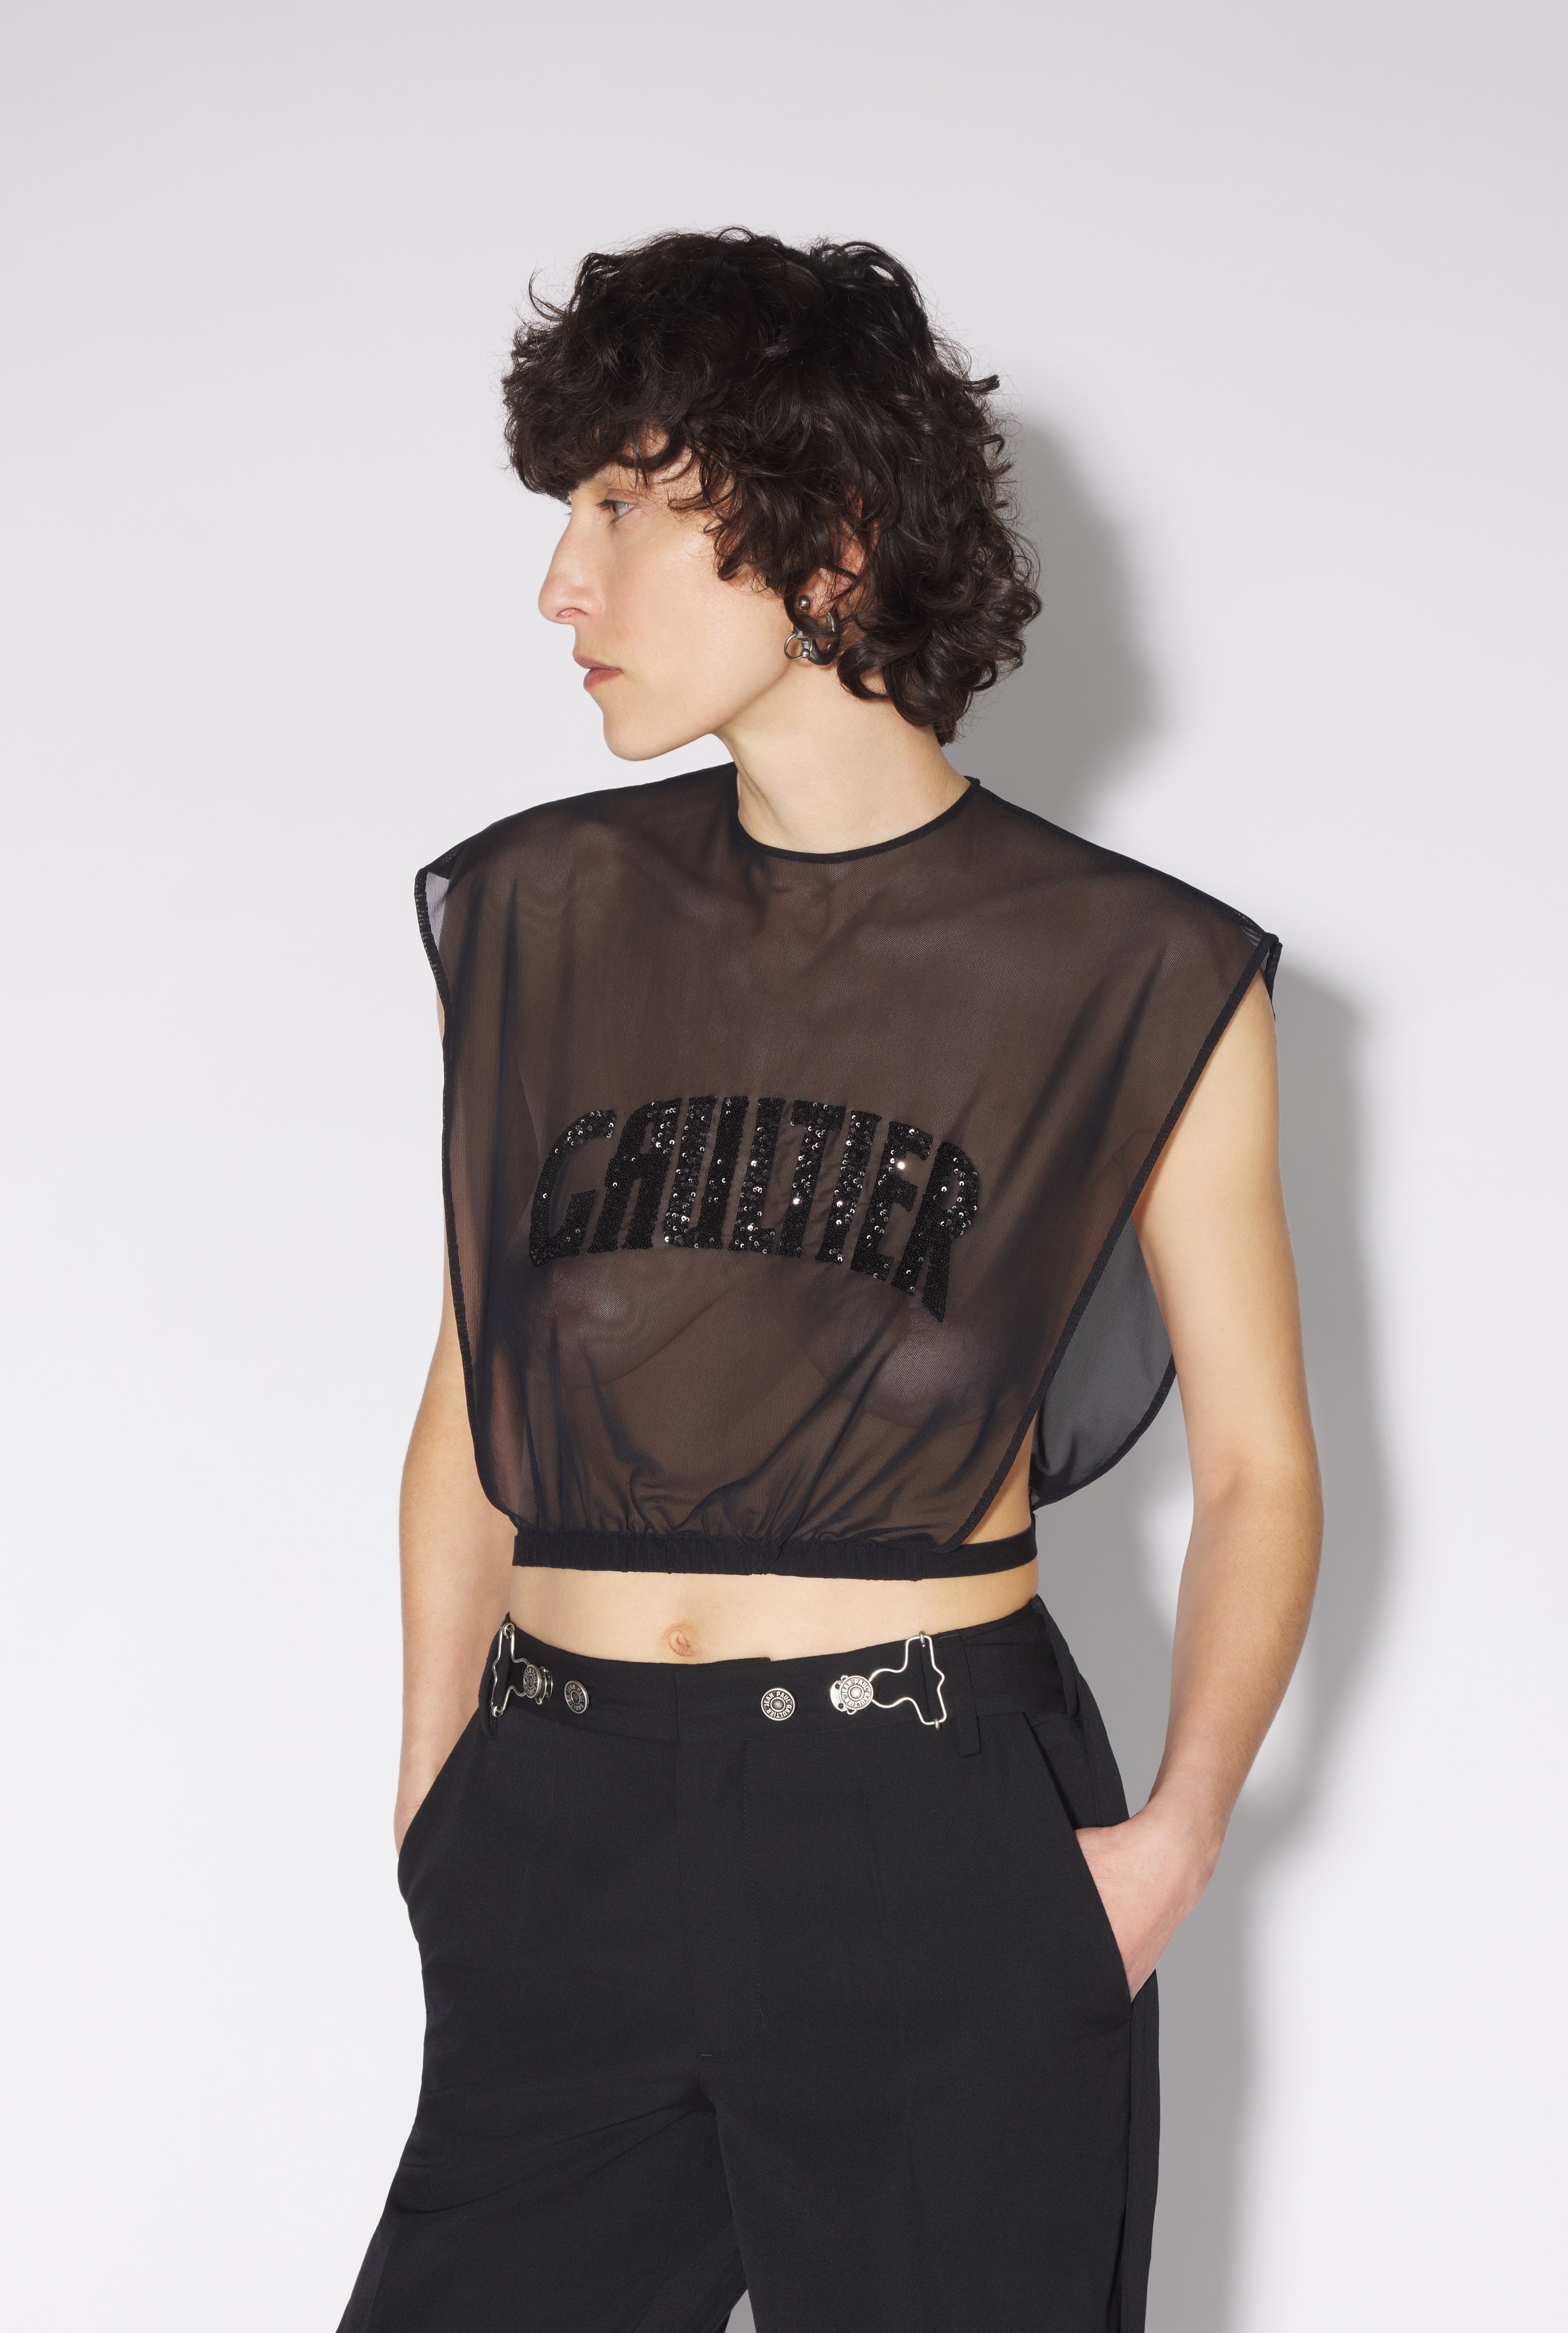 The Gaultier Tulle Top